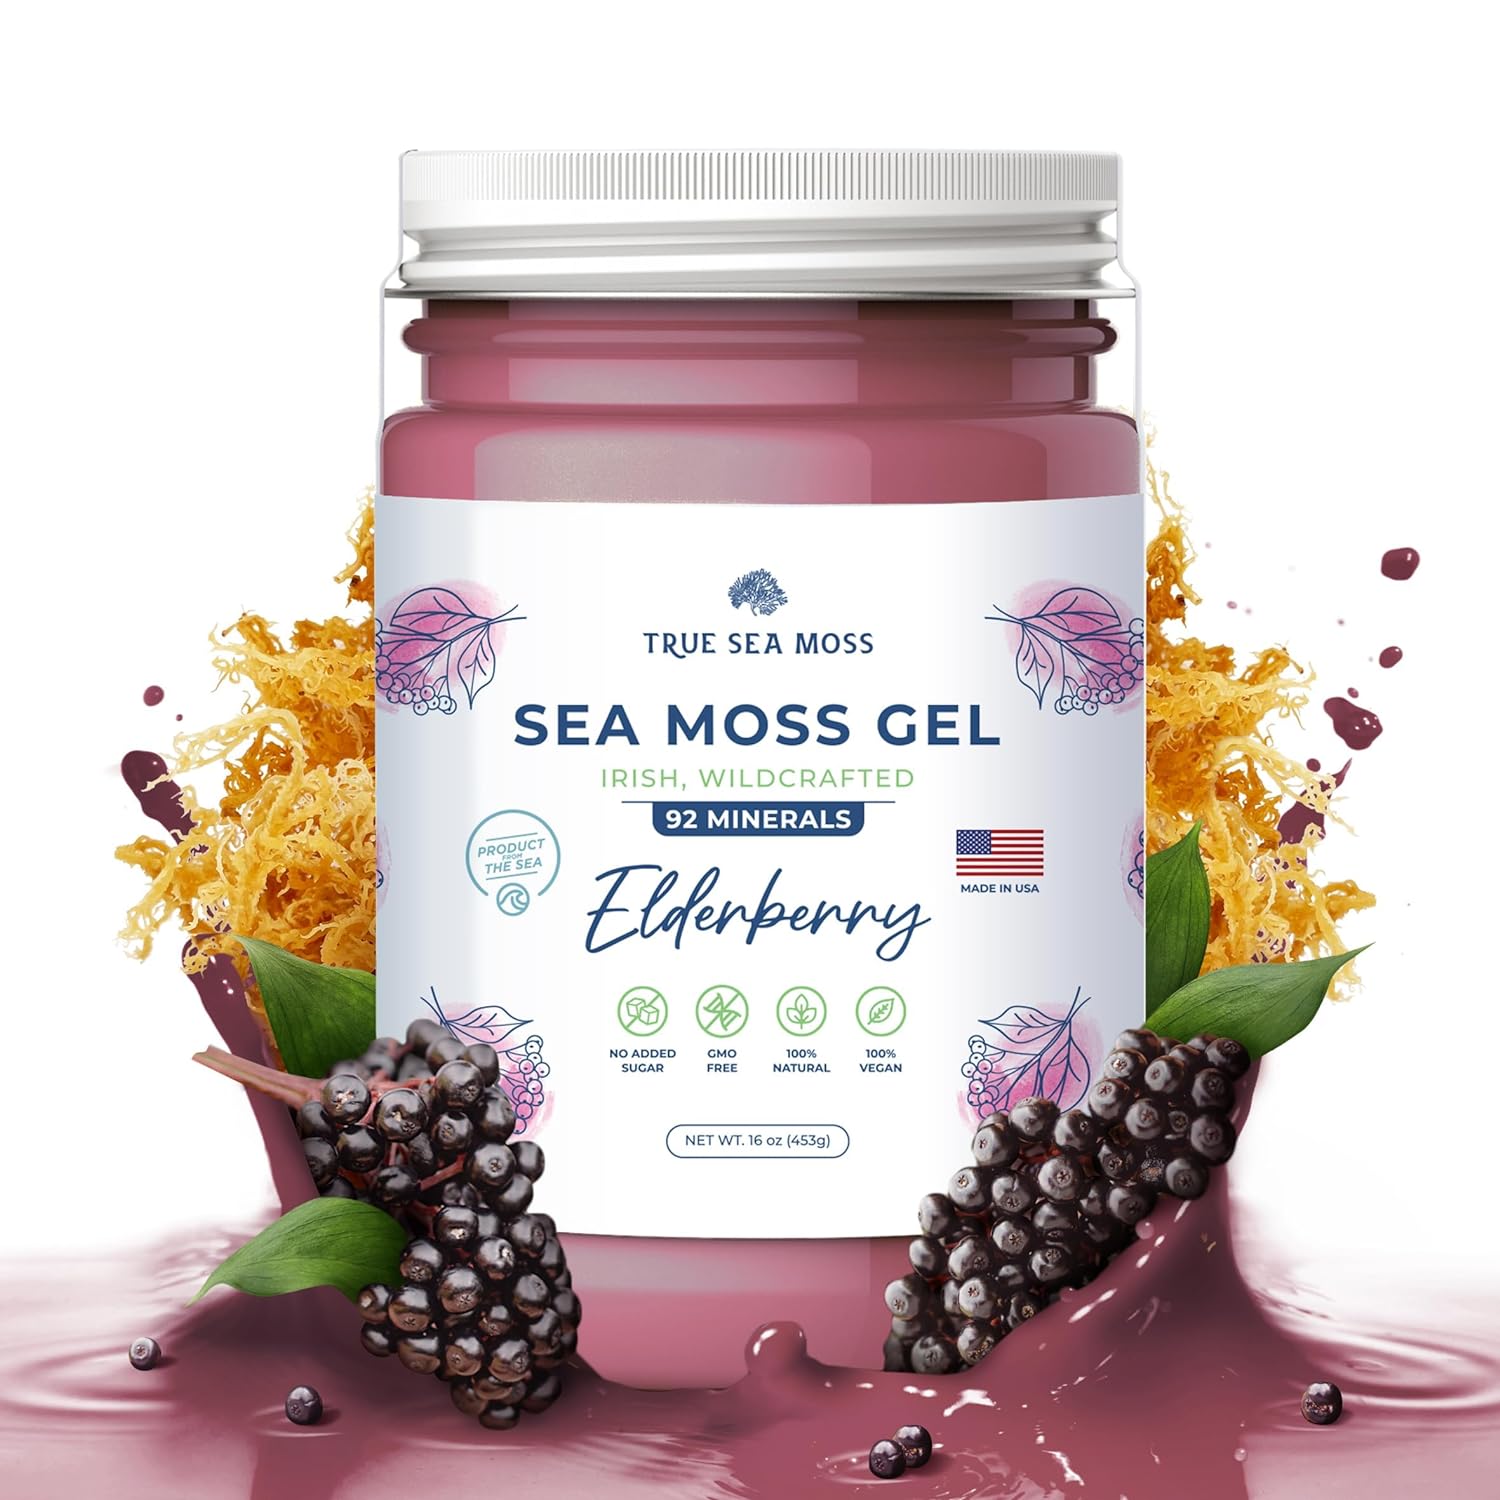 TrueSeaMoss Wildcrafted Irish Sea Moss Gel - Made with Dried Seaweed - Seamoss, Vegan-Friendly, Antioxidant Supports Thyroid & Digestion - Made in USA (Elderberry, Pack of 1)